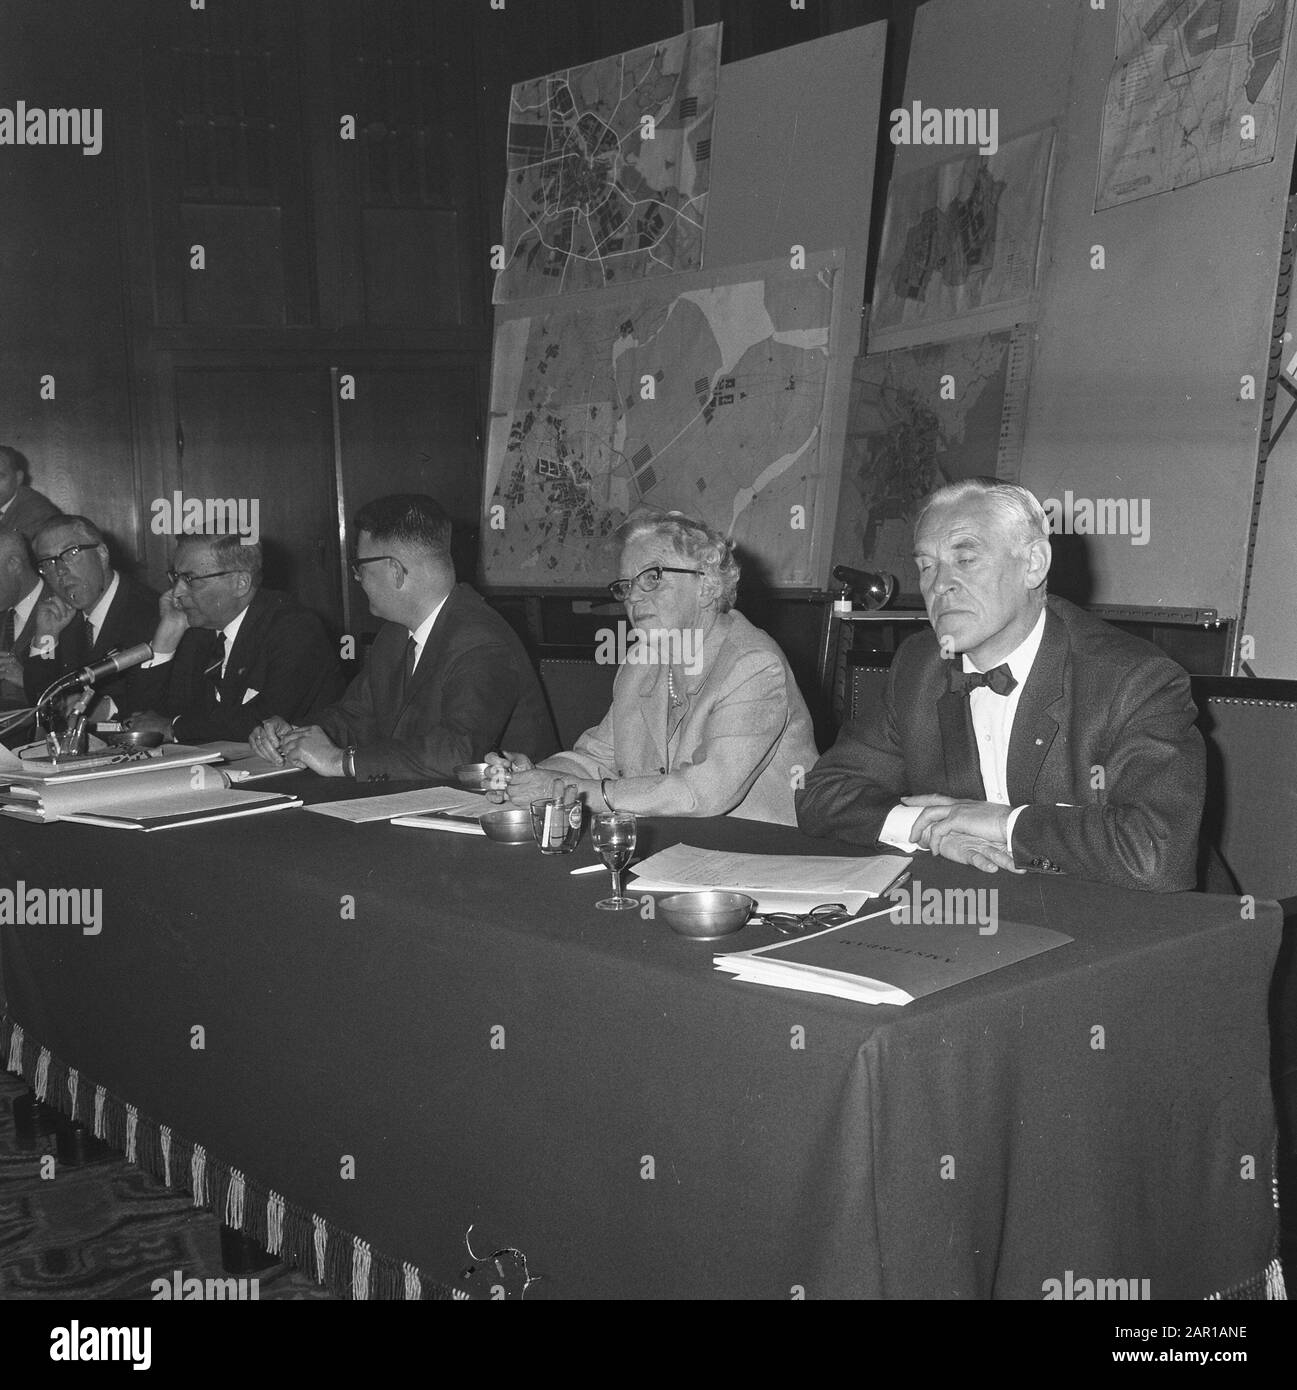 South-eastern expansion of Amsterdam, during press conference of mayor Kastelein, mayor Van Hall, Mr. Elsenburg Date: 3 June 1965 Location: Amsterdam, North Holland Keywords: City extensions, mayors, press conferences Stock Photo